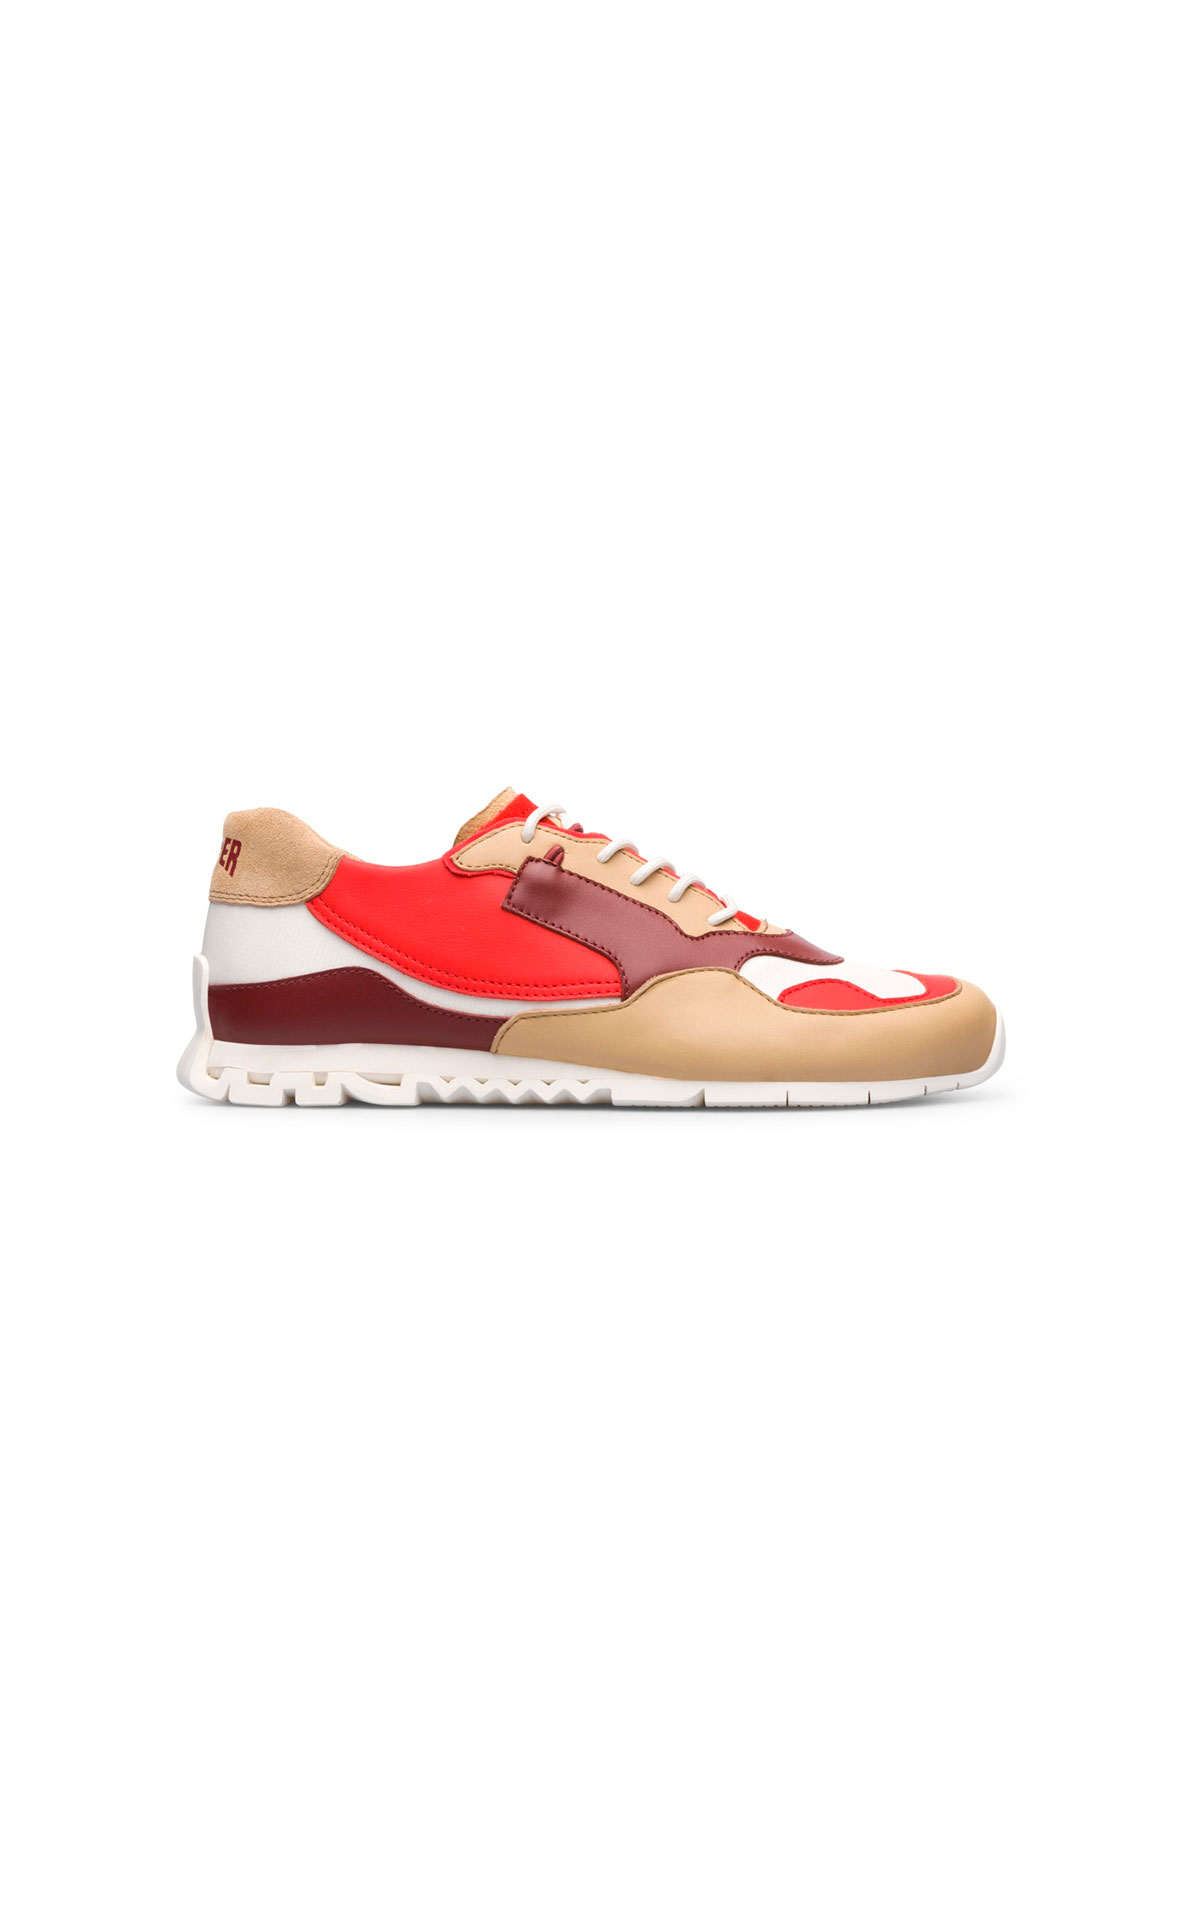 Red and brown sneakers